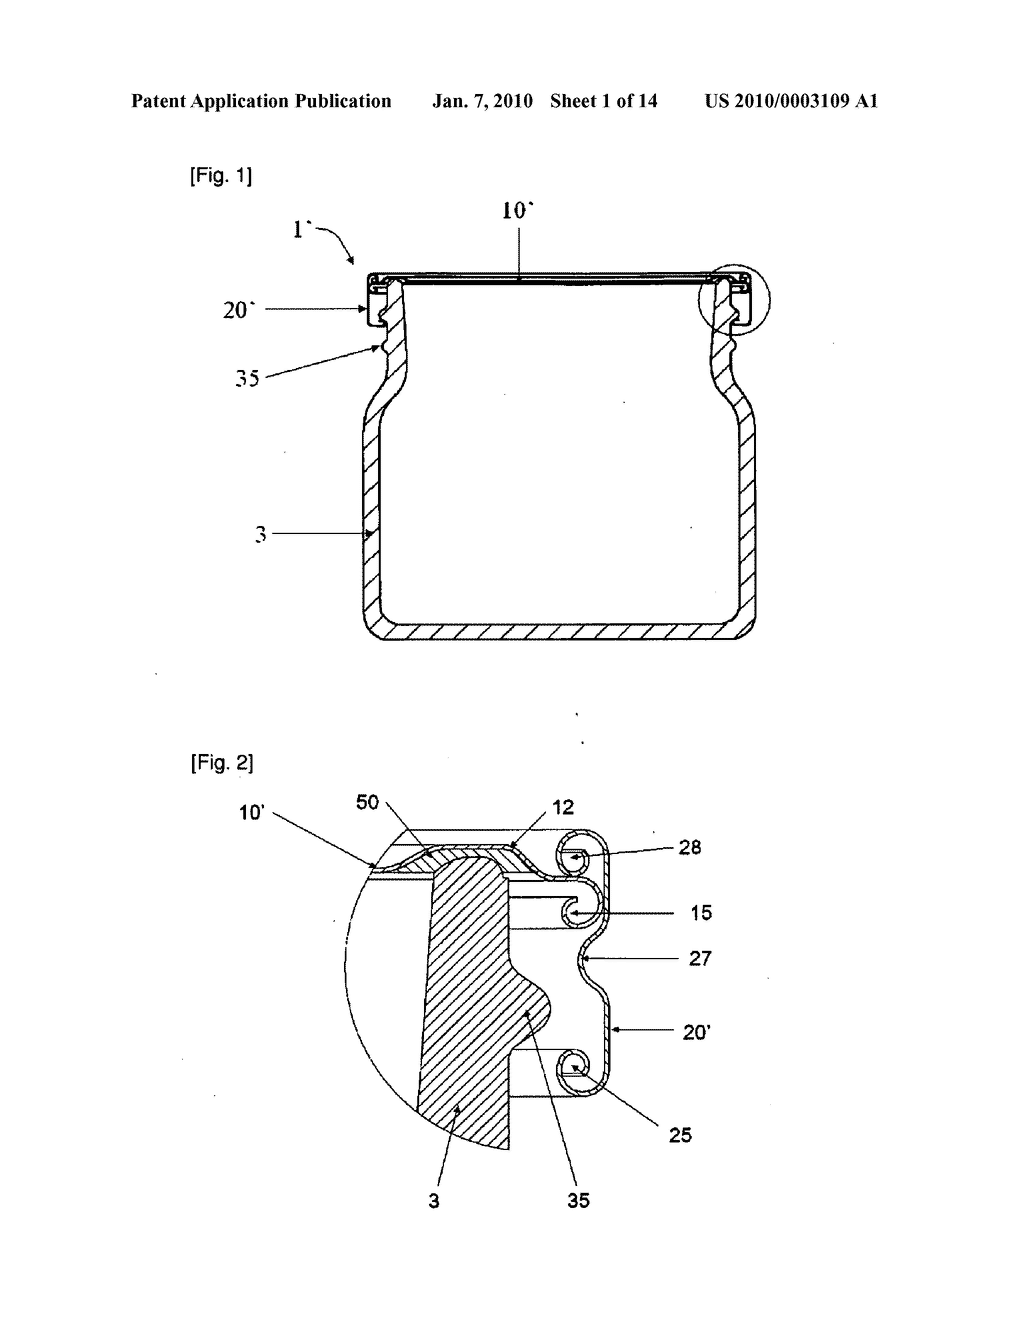 METHOD FOR PRODUCING SUCH A METAL CLOSURE WITH SEPERATE DISC AND RING FROM A SINGLE CLOSURE BLANK - diagram, schematic, and image 02